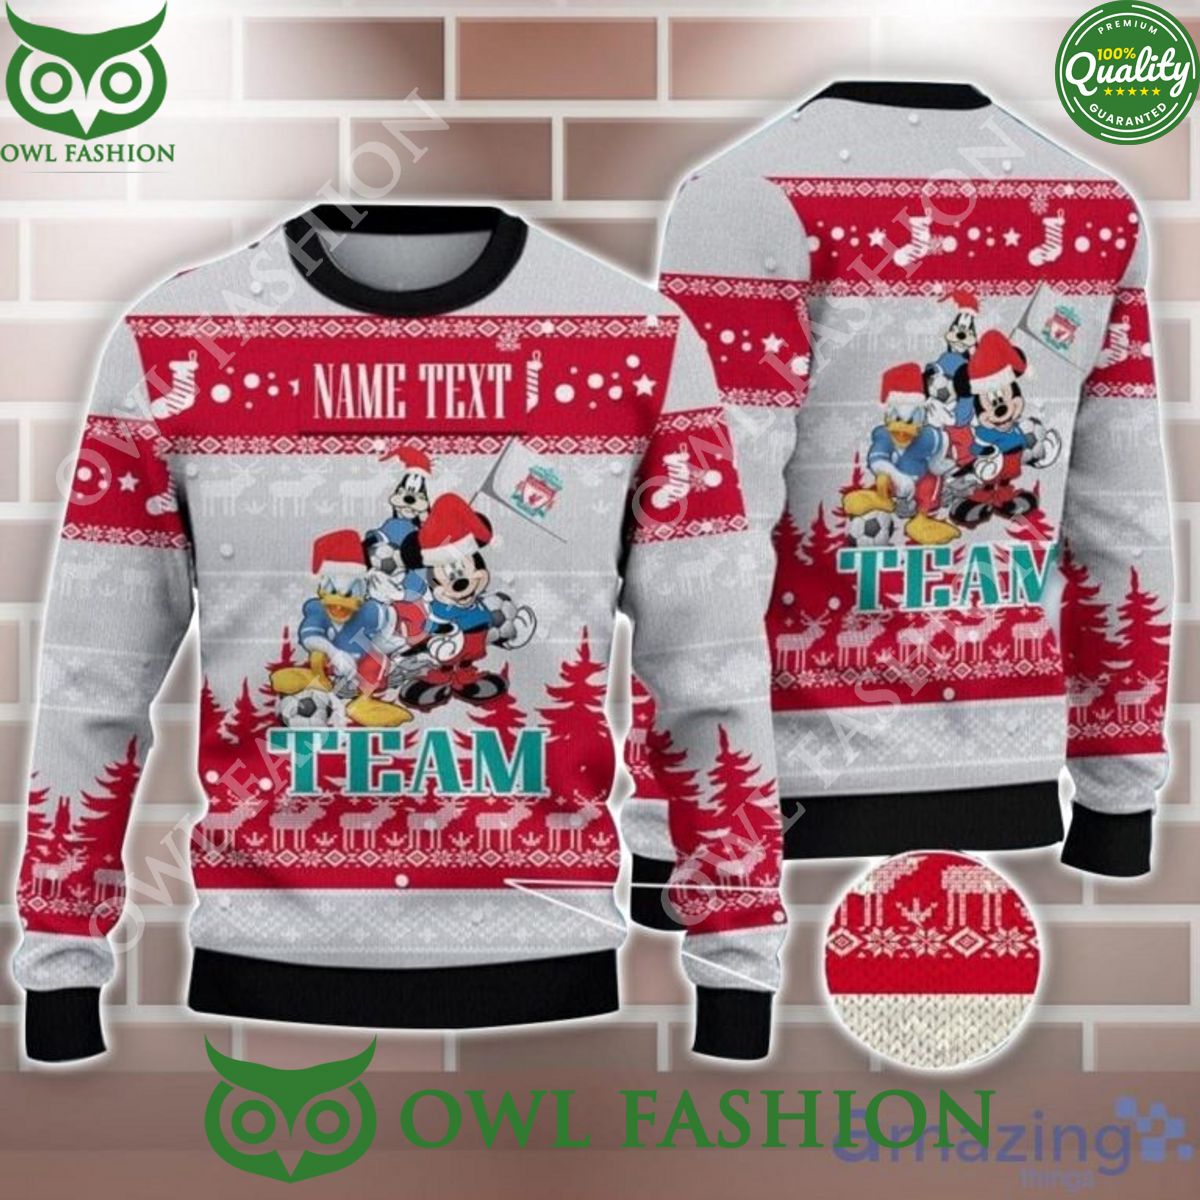 Disney Team Liverpool FC Customized Ugly Christmas Sweater Jumper